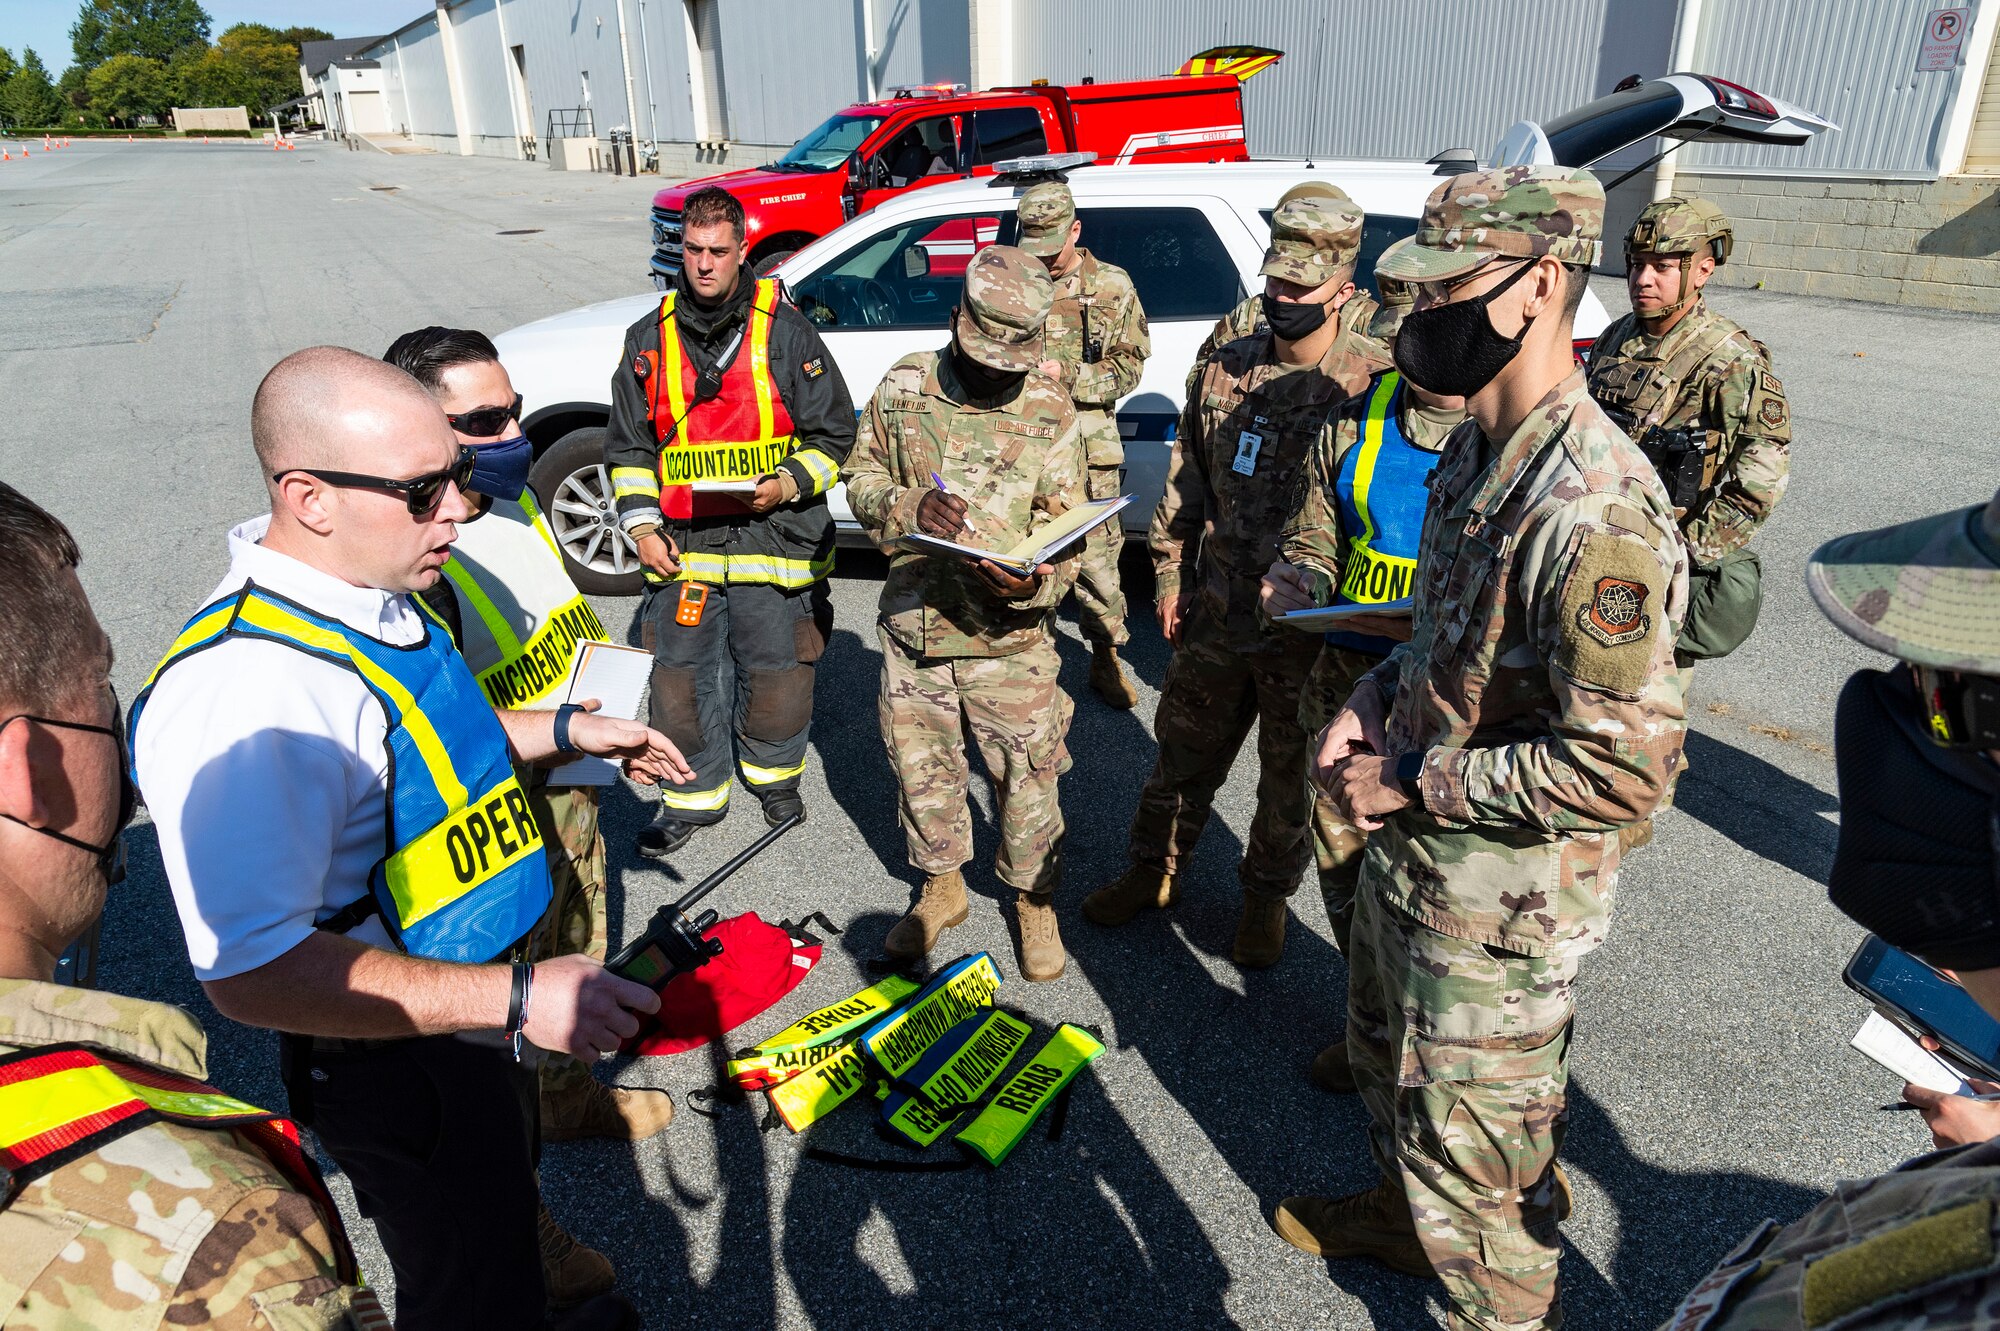 Jeremy Lundgren, left, 436th Civil Engineer Squadron fire department section chief, briefs key personnel for a scenario during the Force Protection Major Accident Response Exercise at Dover Air Force Base, Delaware, Oct. 7, 2021. The three-day exercise tested theresponse capabilities of Team Dover through various scenarios in an effort to strengthen their ability to provide rapid-global mobility in challenging conditions. (U.S. Air Force photo by Roland Balik)